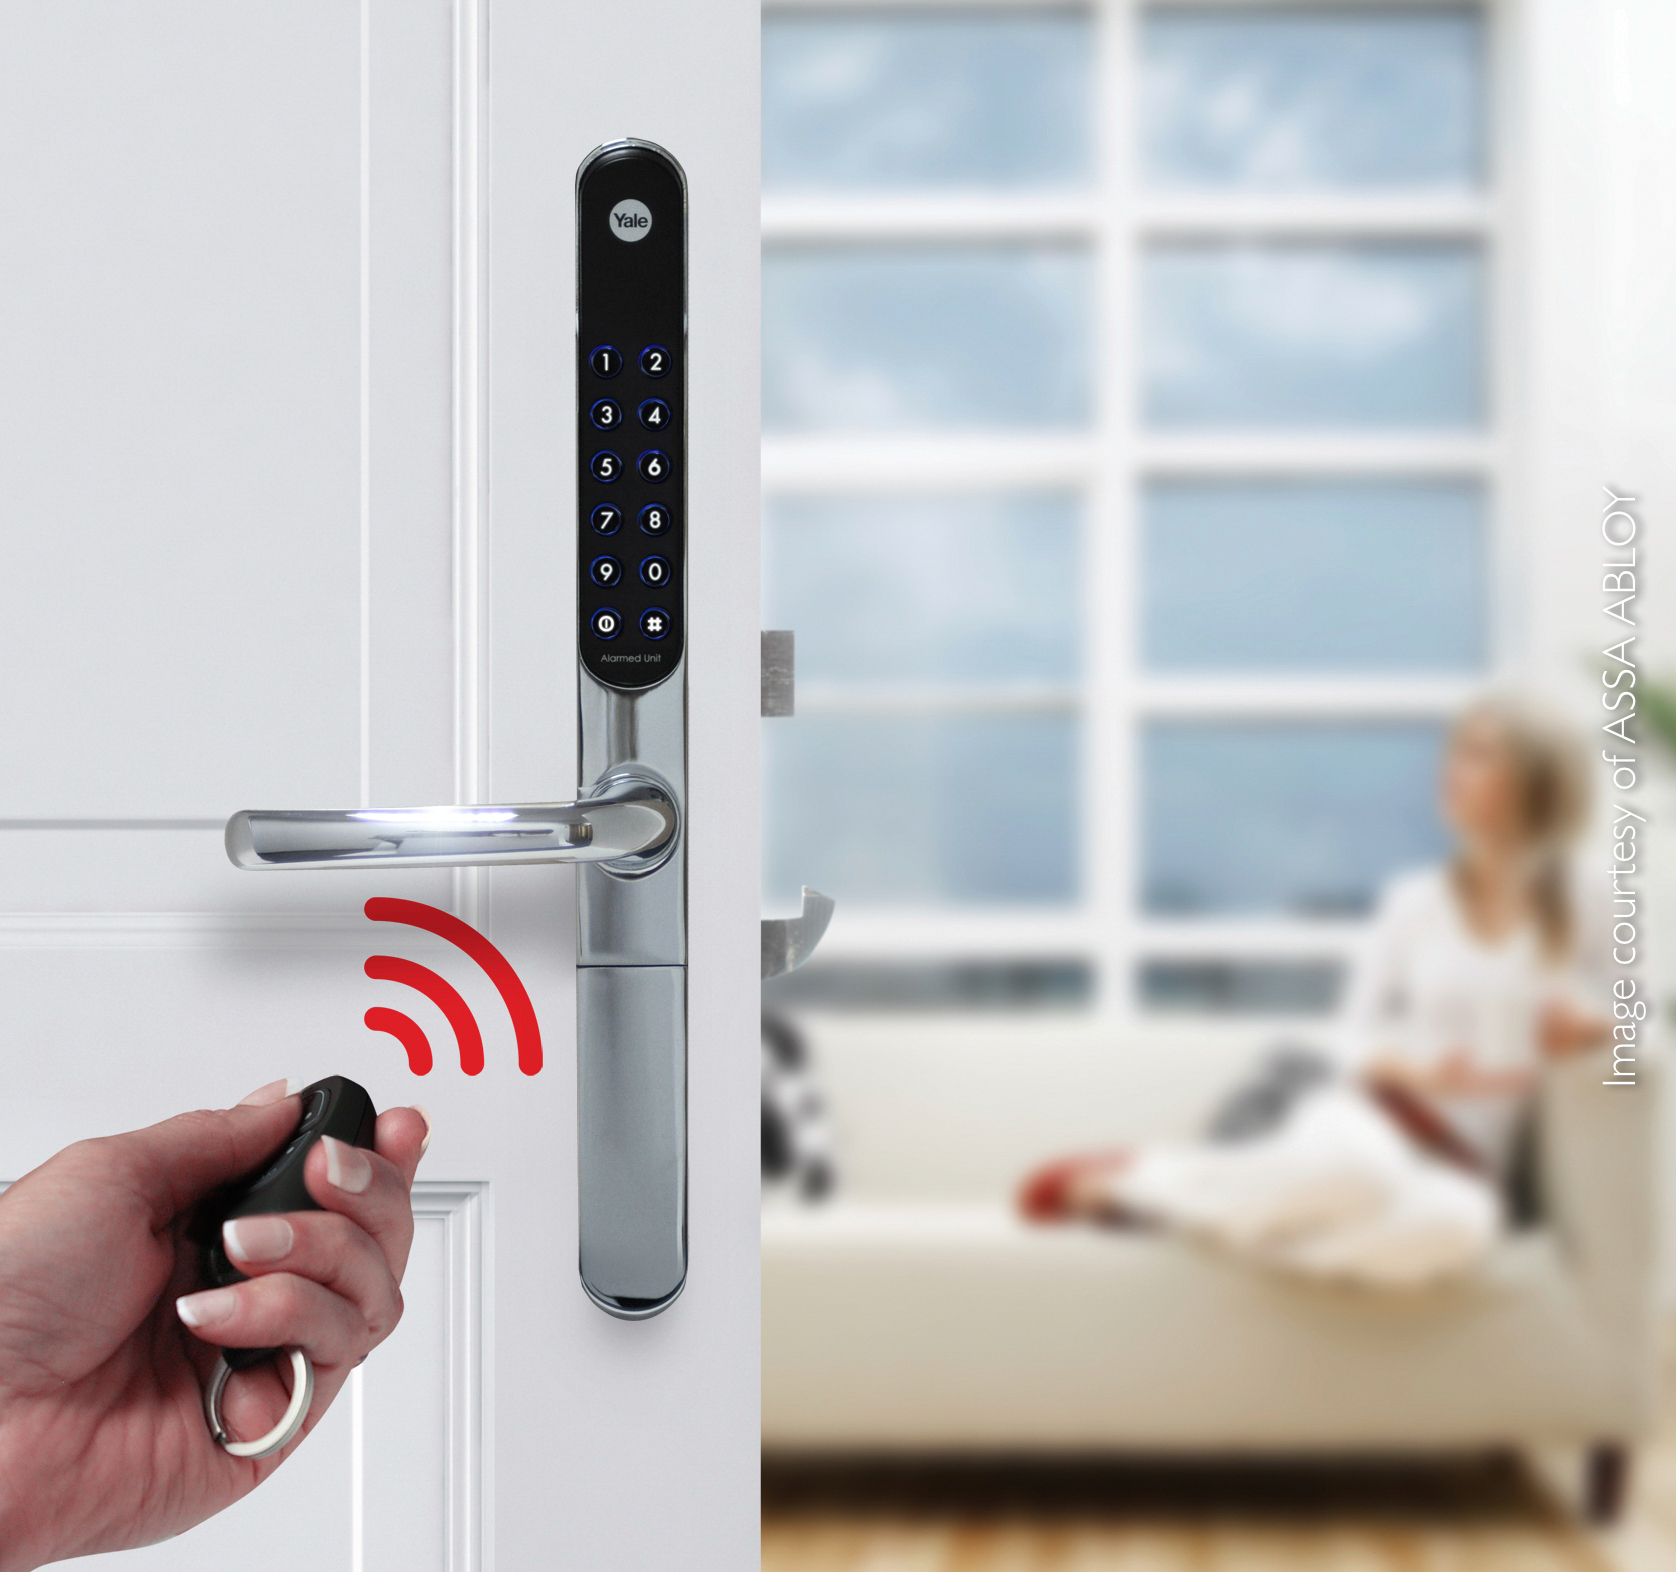 A smart home starts with a smart door.